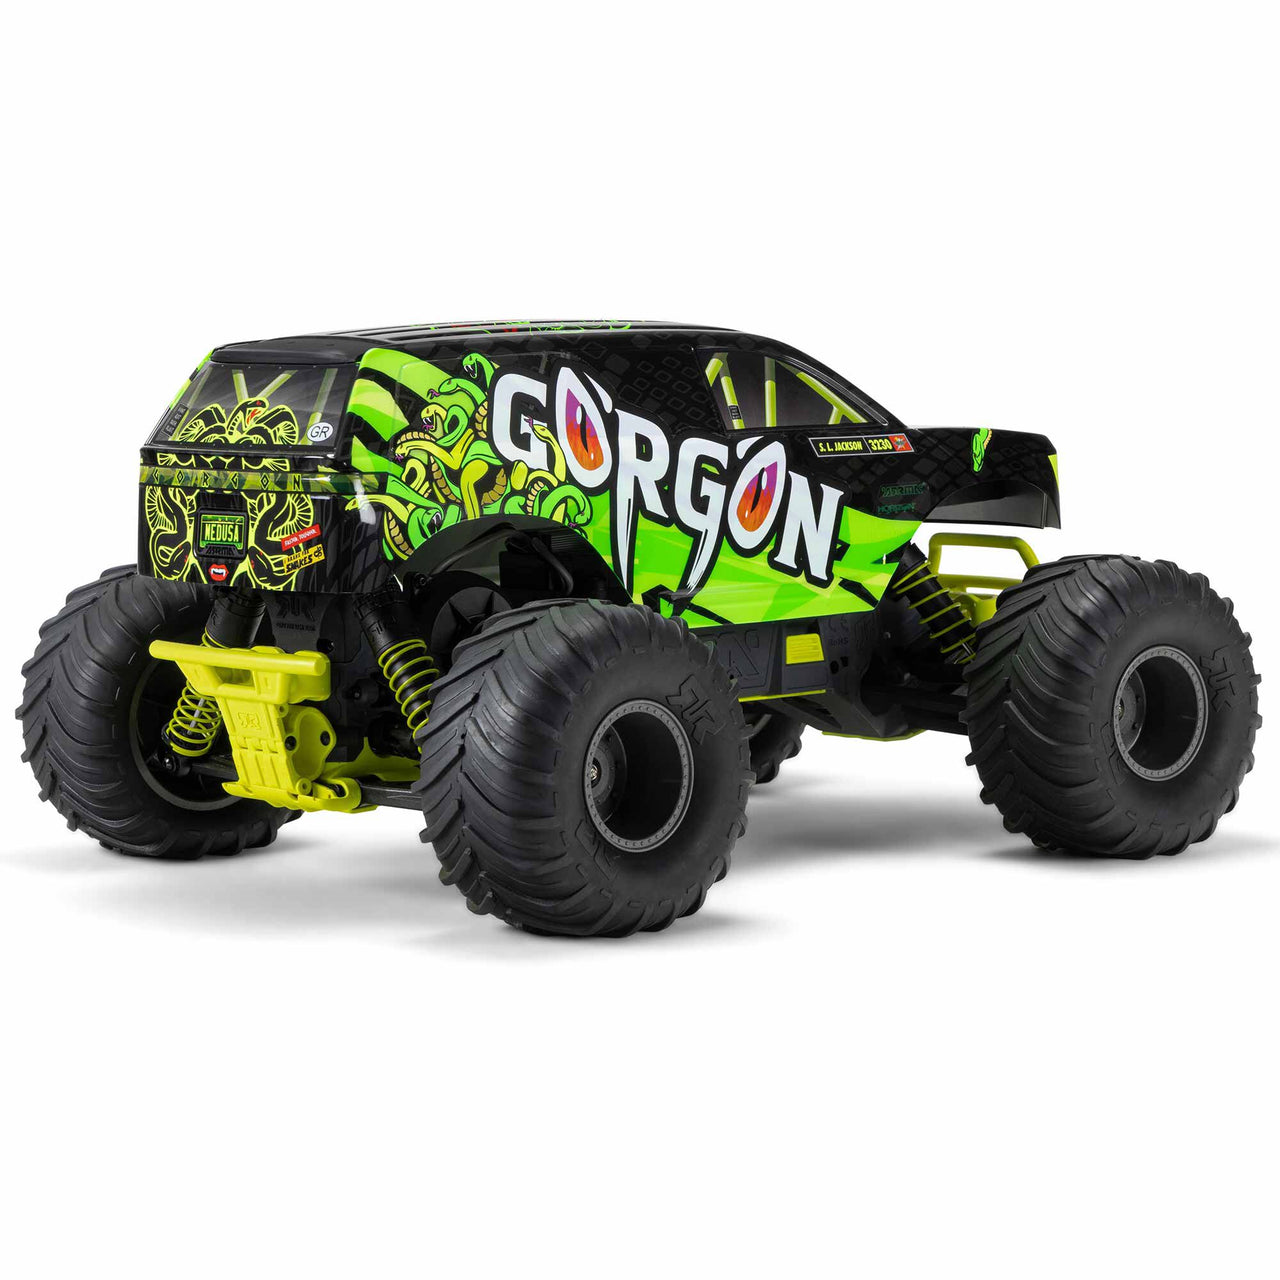 ARA3230ST1 1/10 GORGON 4X2 MEGA 550 Brushed Monster Truck RTR with Battery & Charger, Yellow